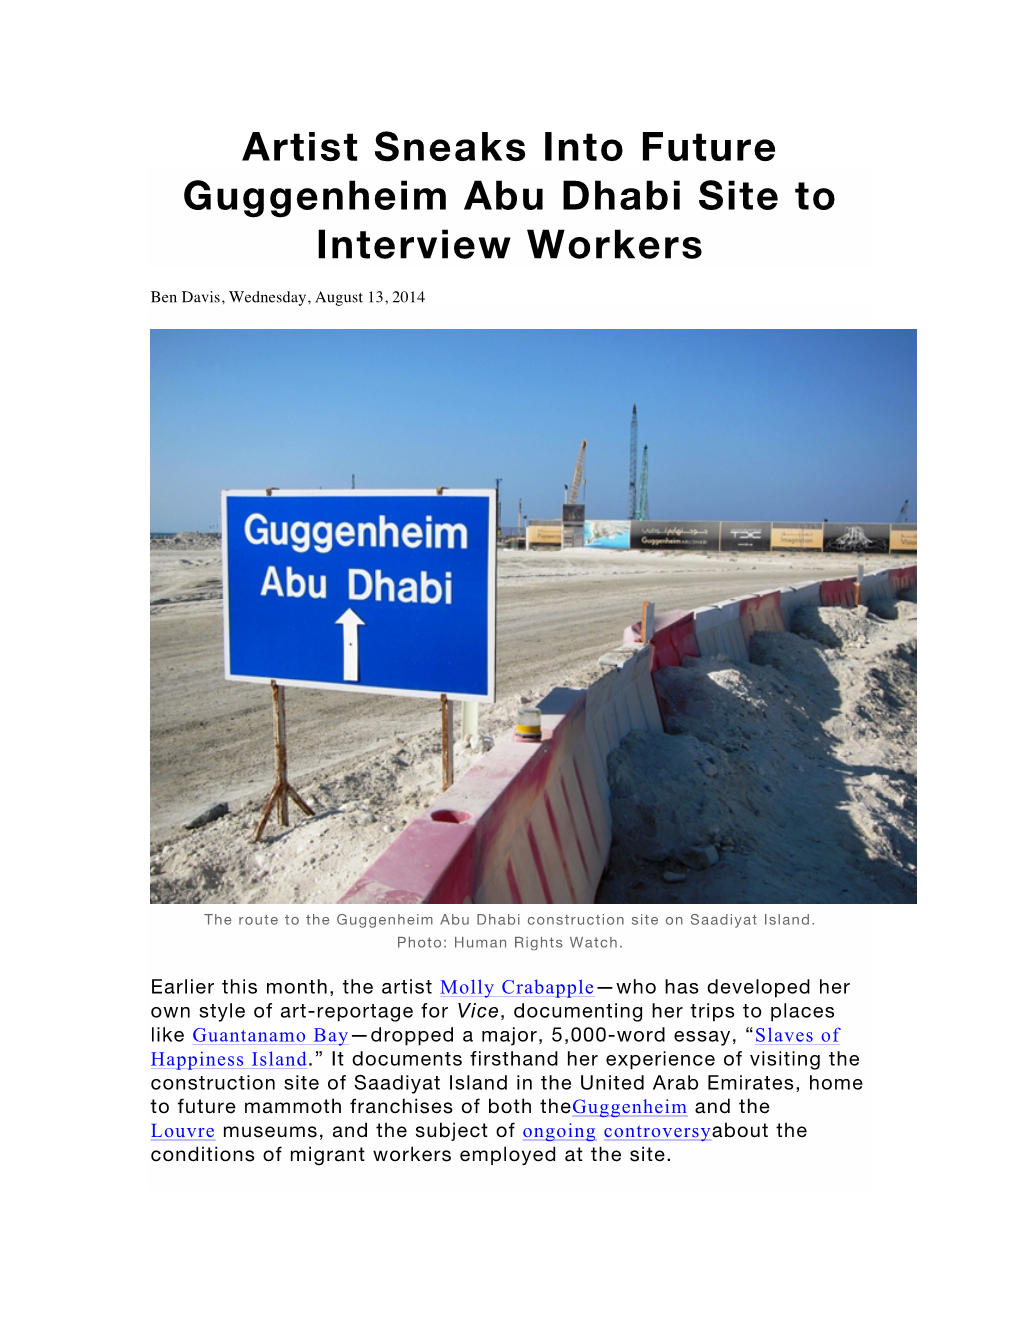 Artist Sneaks Into Future Guggenheim Abu Dhabi Site to Interview Workers